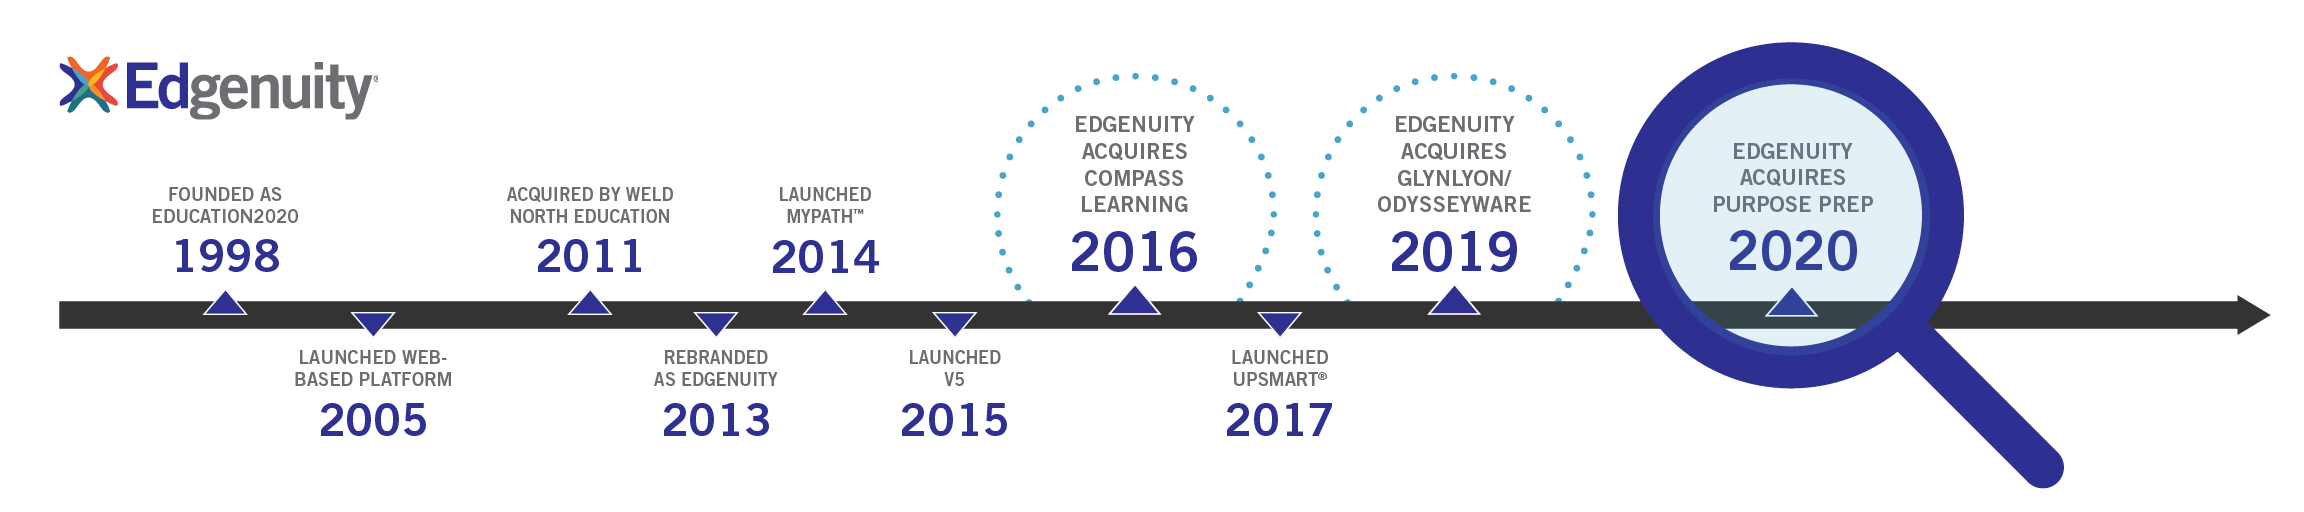 Graphic showing detail about Edgenuity’s history